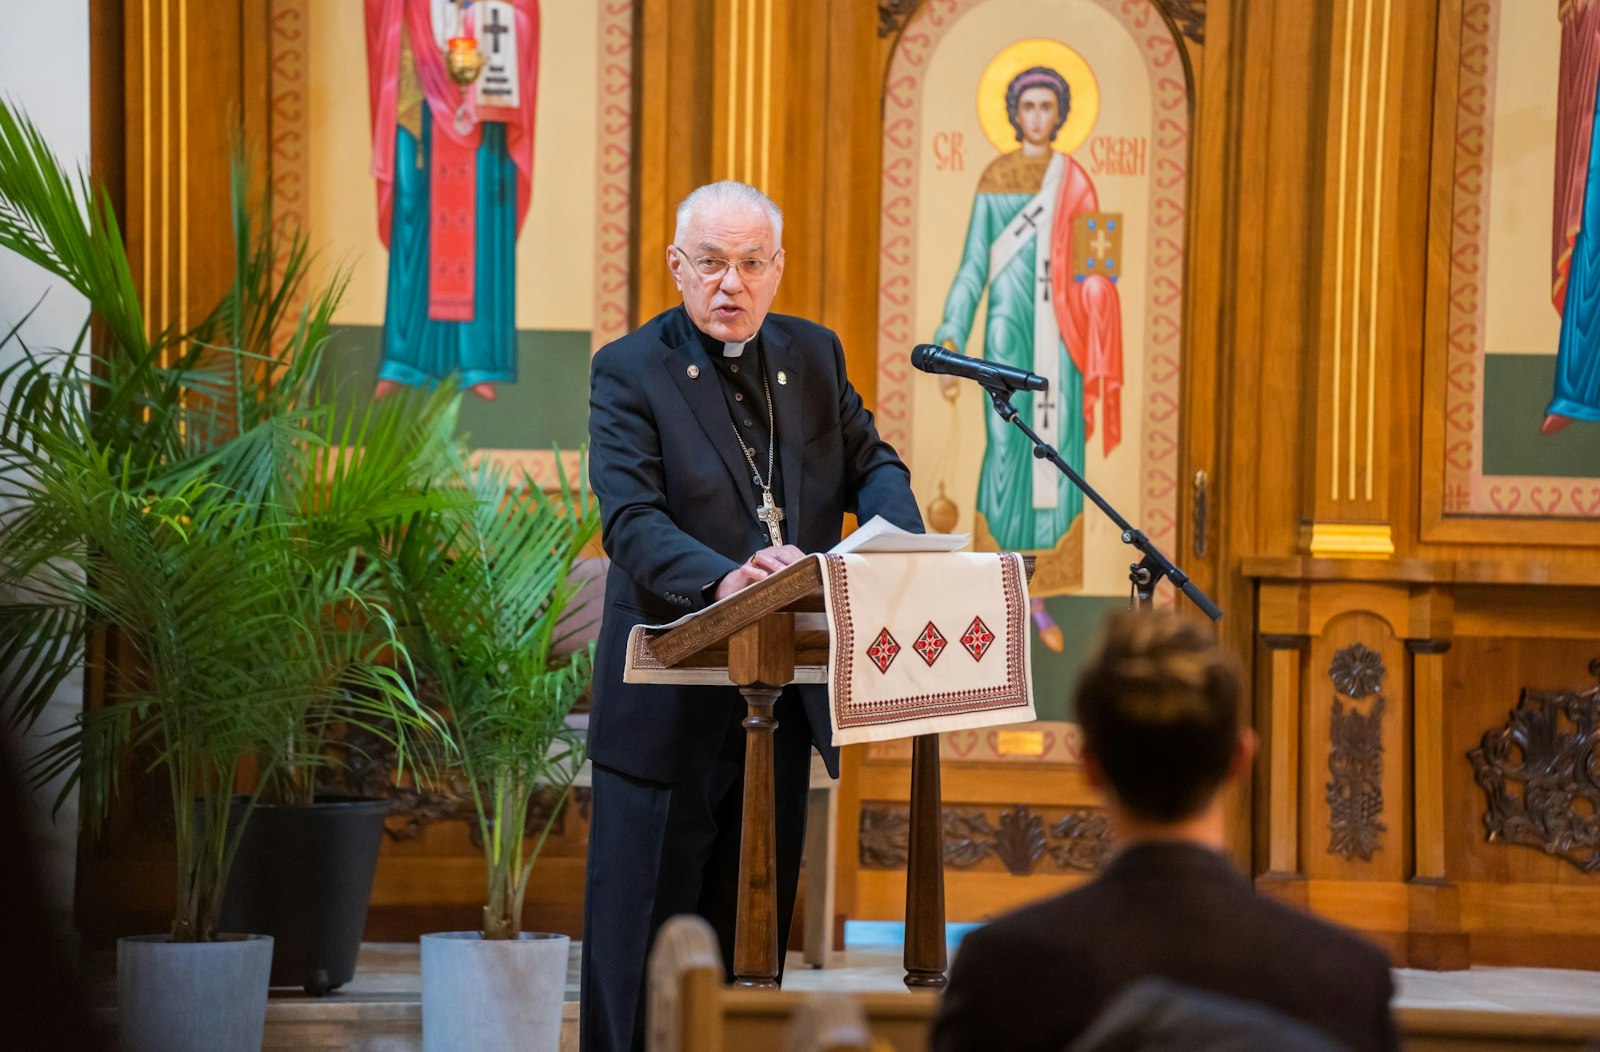 Detroit Auxiliary Bishop Donald Hanchon speaks as a representative of the Archdiocese of Detroit during a Feb. 5 ecumenical prayer vigil at St. Mary the Protectress Ukrainian Orthodox Cathedral in Southfield. Bishop Hanchon called upon the protection of the Blessed Virgin Mary, in her role as Queen of Peace, to cover the people of Ukraine as world leaders seek to diffuse tensions. (Valaurian Waller | Detroit Catholic)